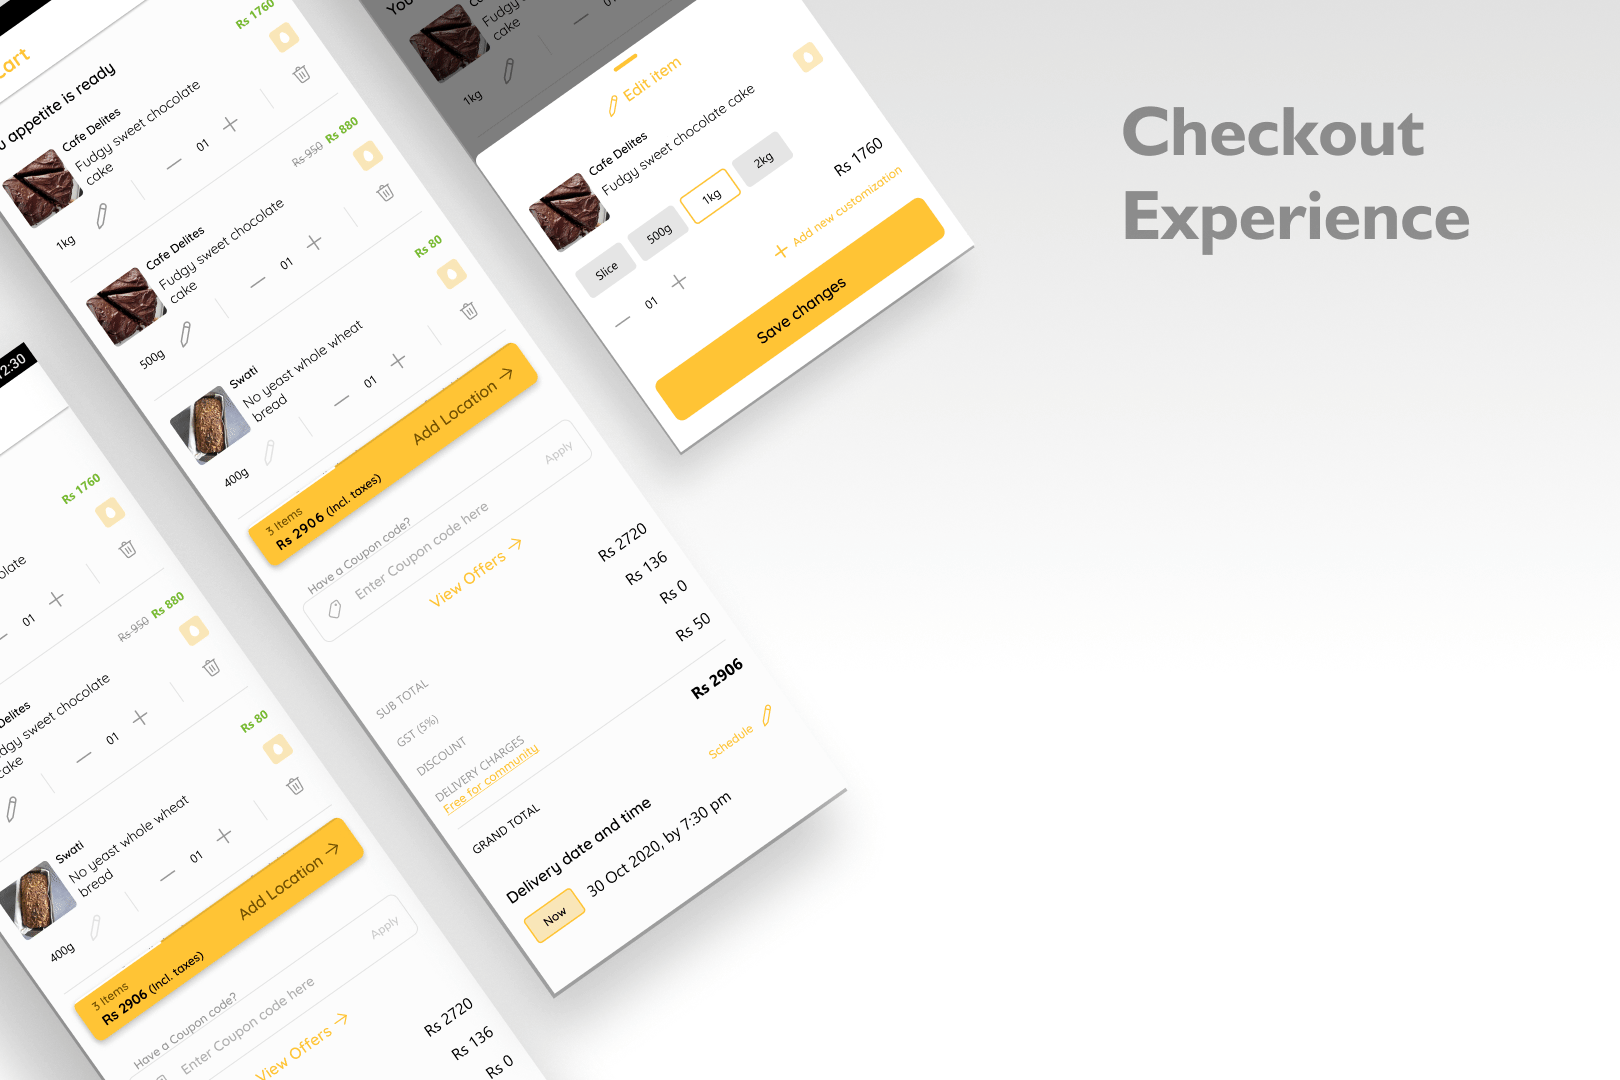 Checkout Experience Gif: Visualizing some elements and UI of checkout screens from the app